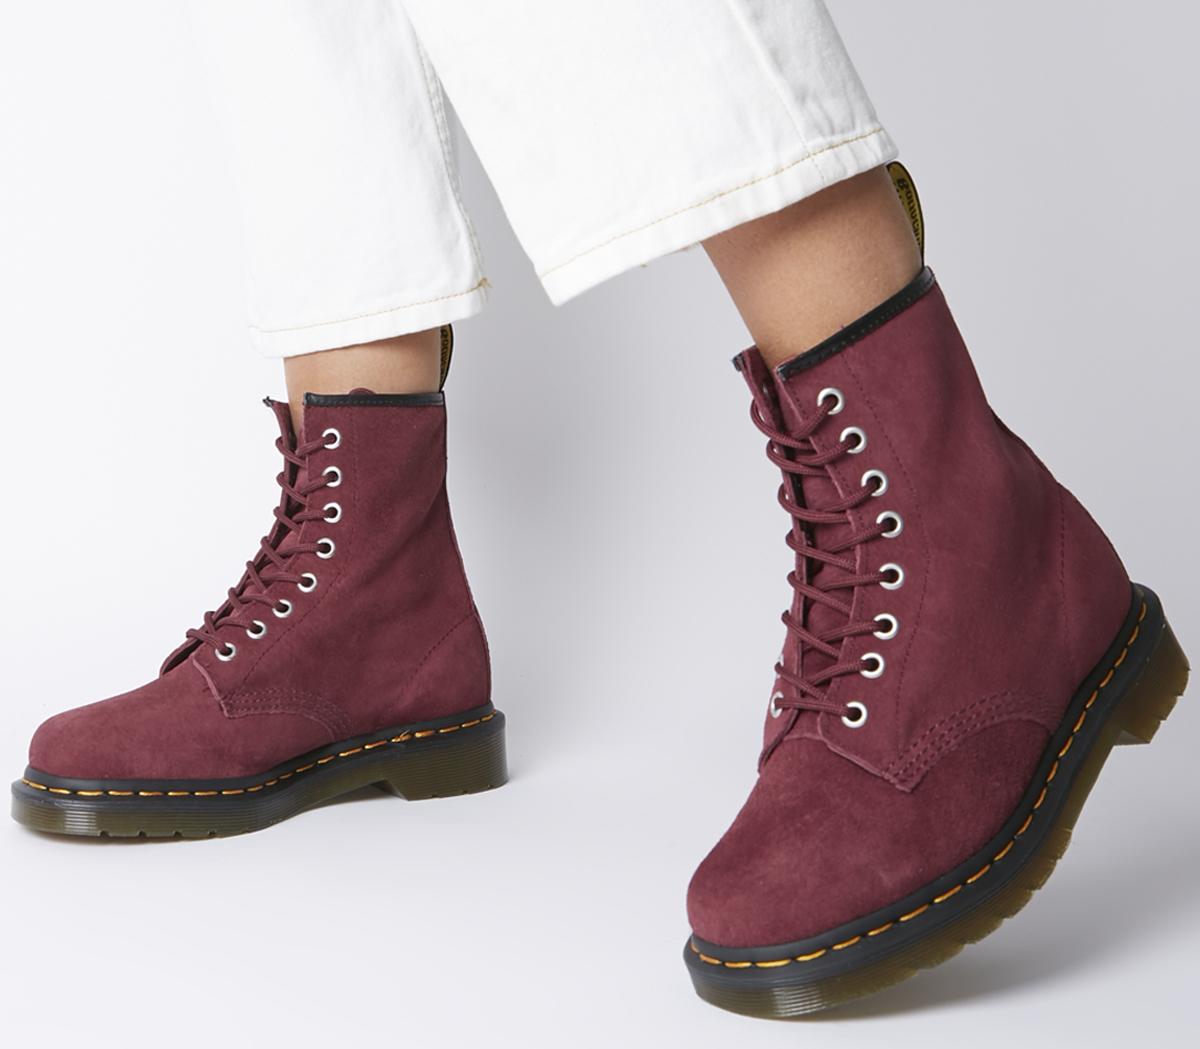 Dr. Martens 8 Eyelet Lace Up Boots Wine 